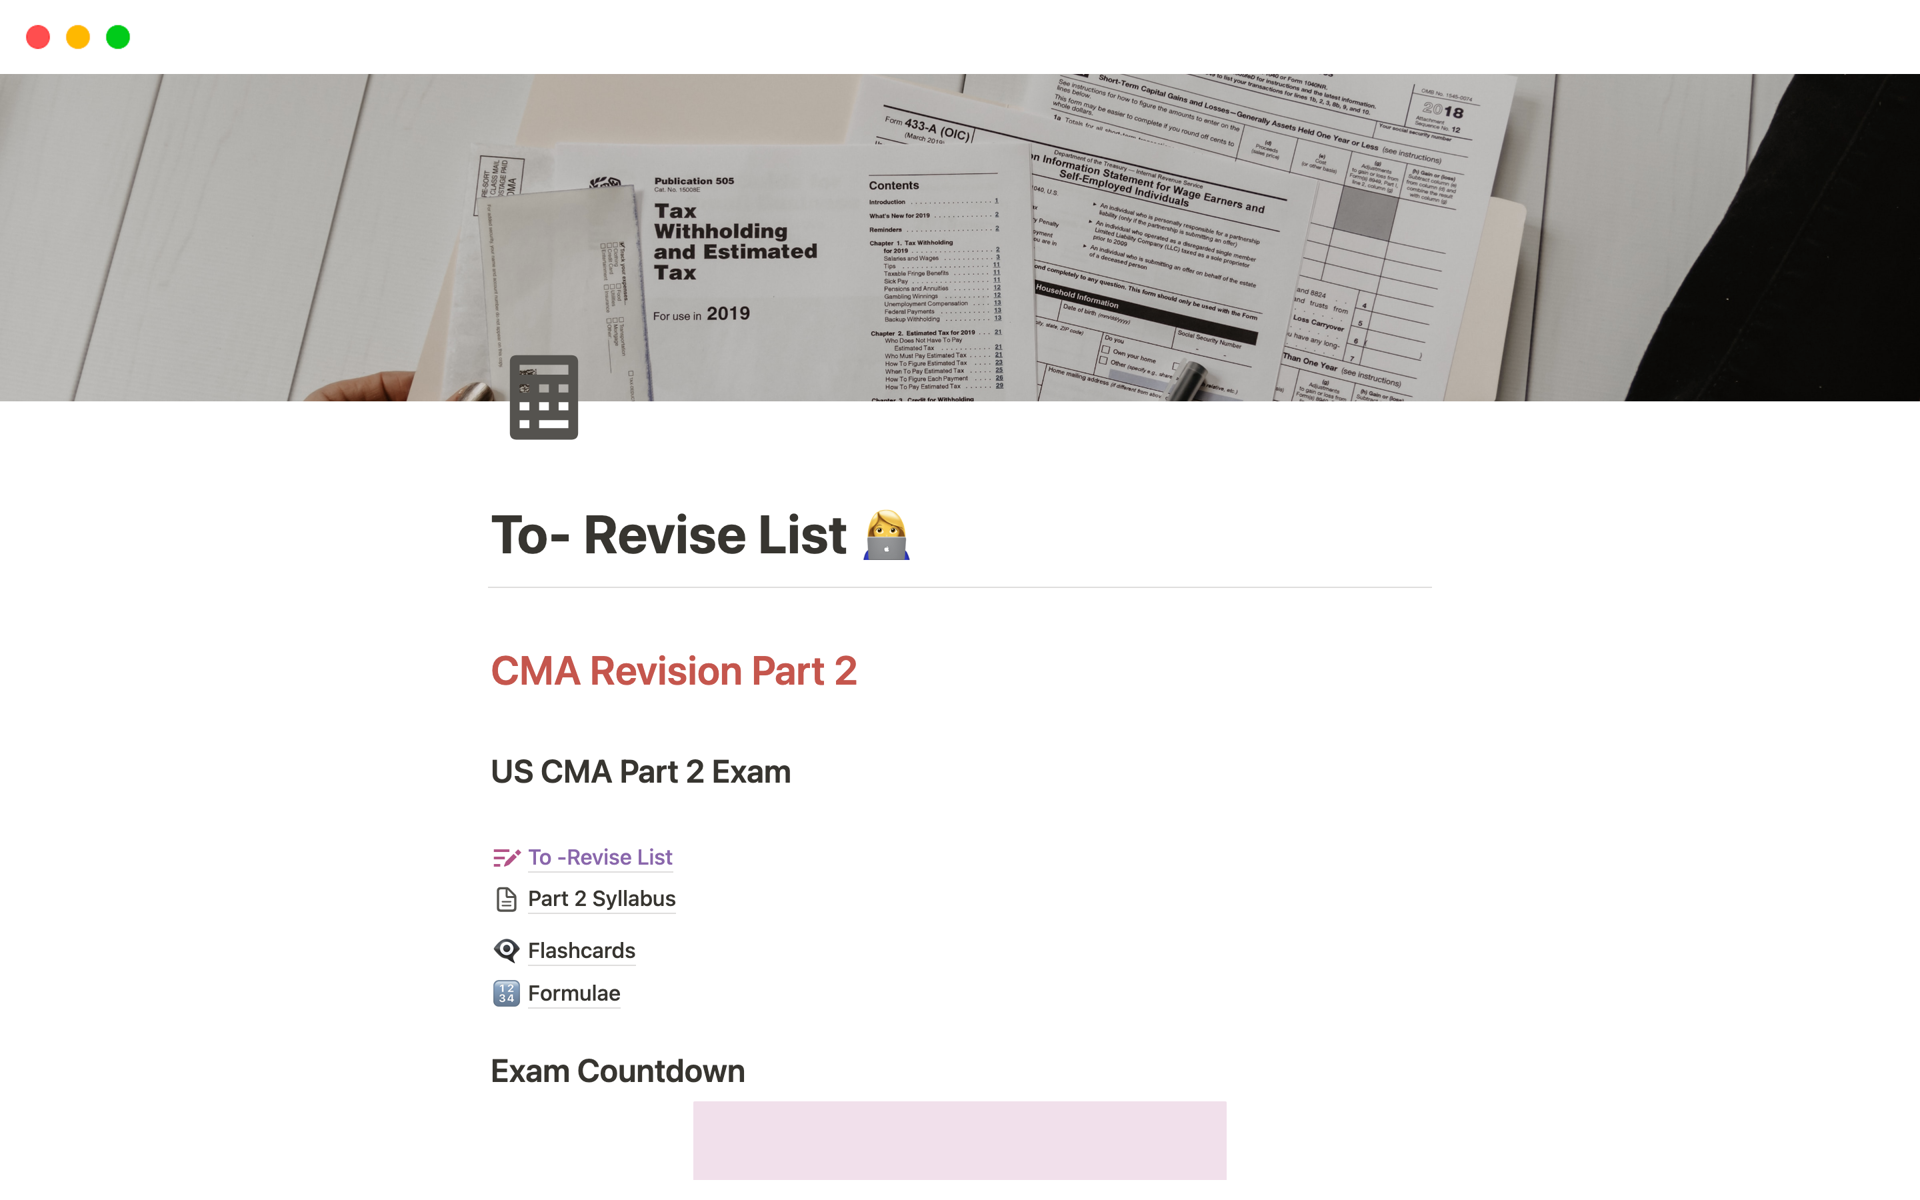 The "To Revise List" template is a comprehensive and organized tool for tracking and prioritizing revision tasks.